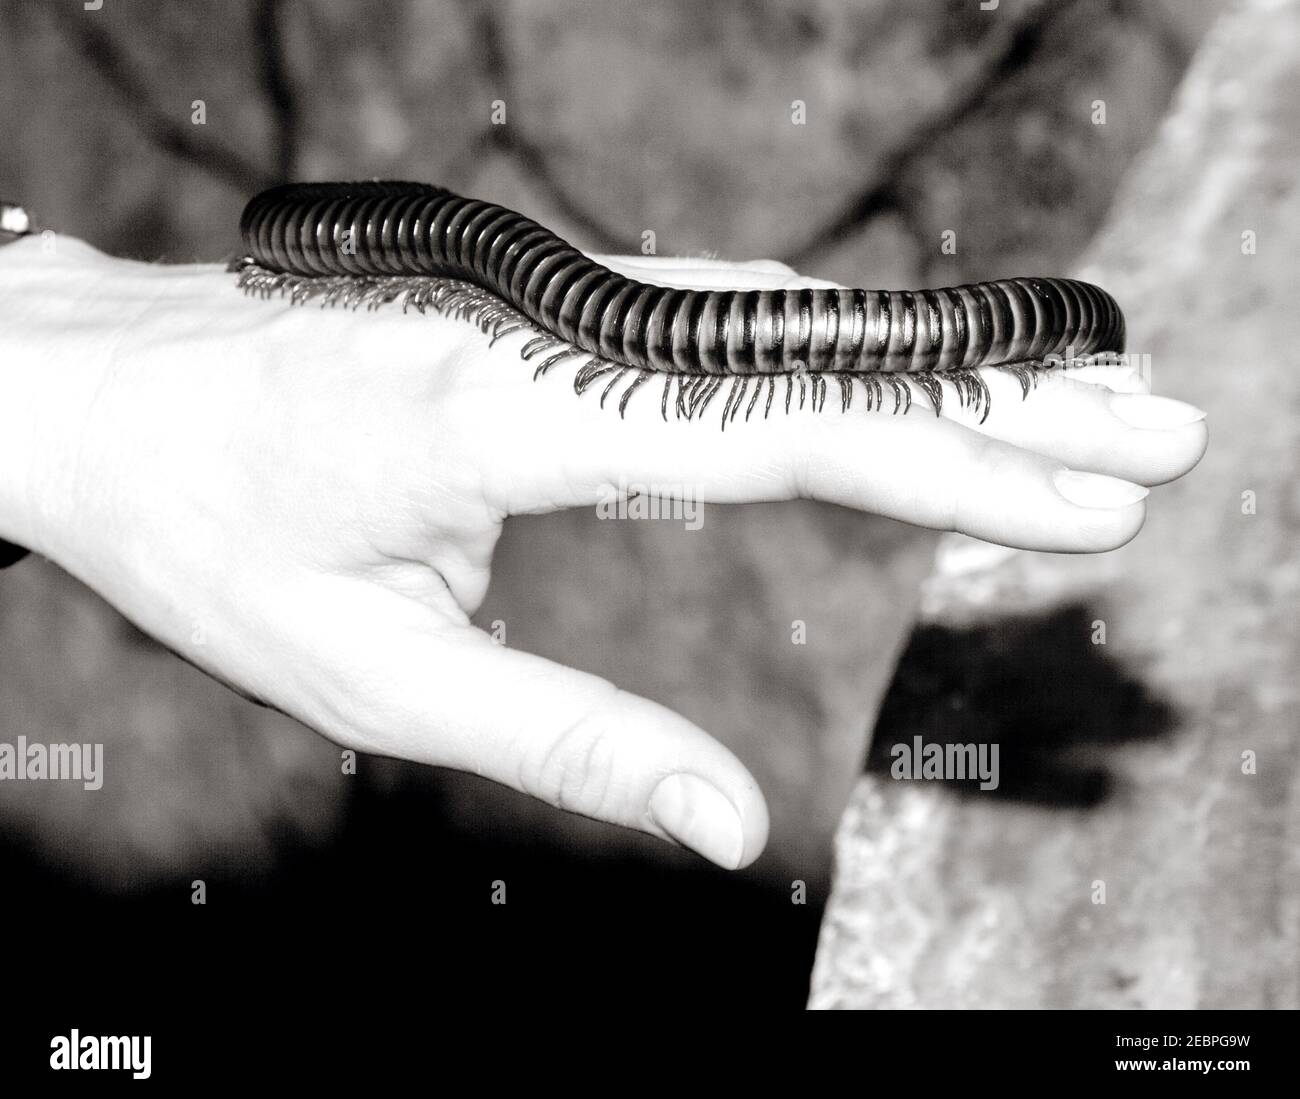 an large millipede worm from asia Stock Photo